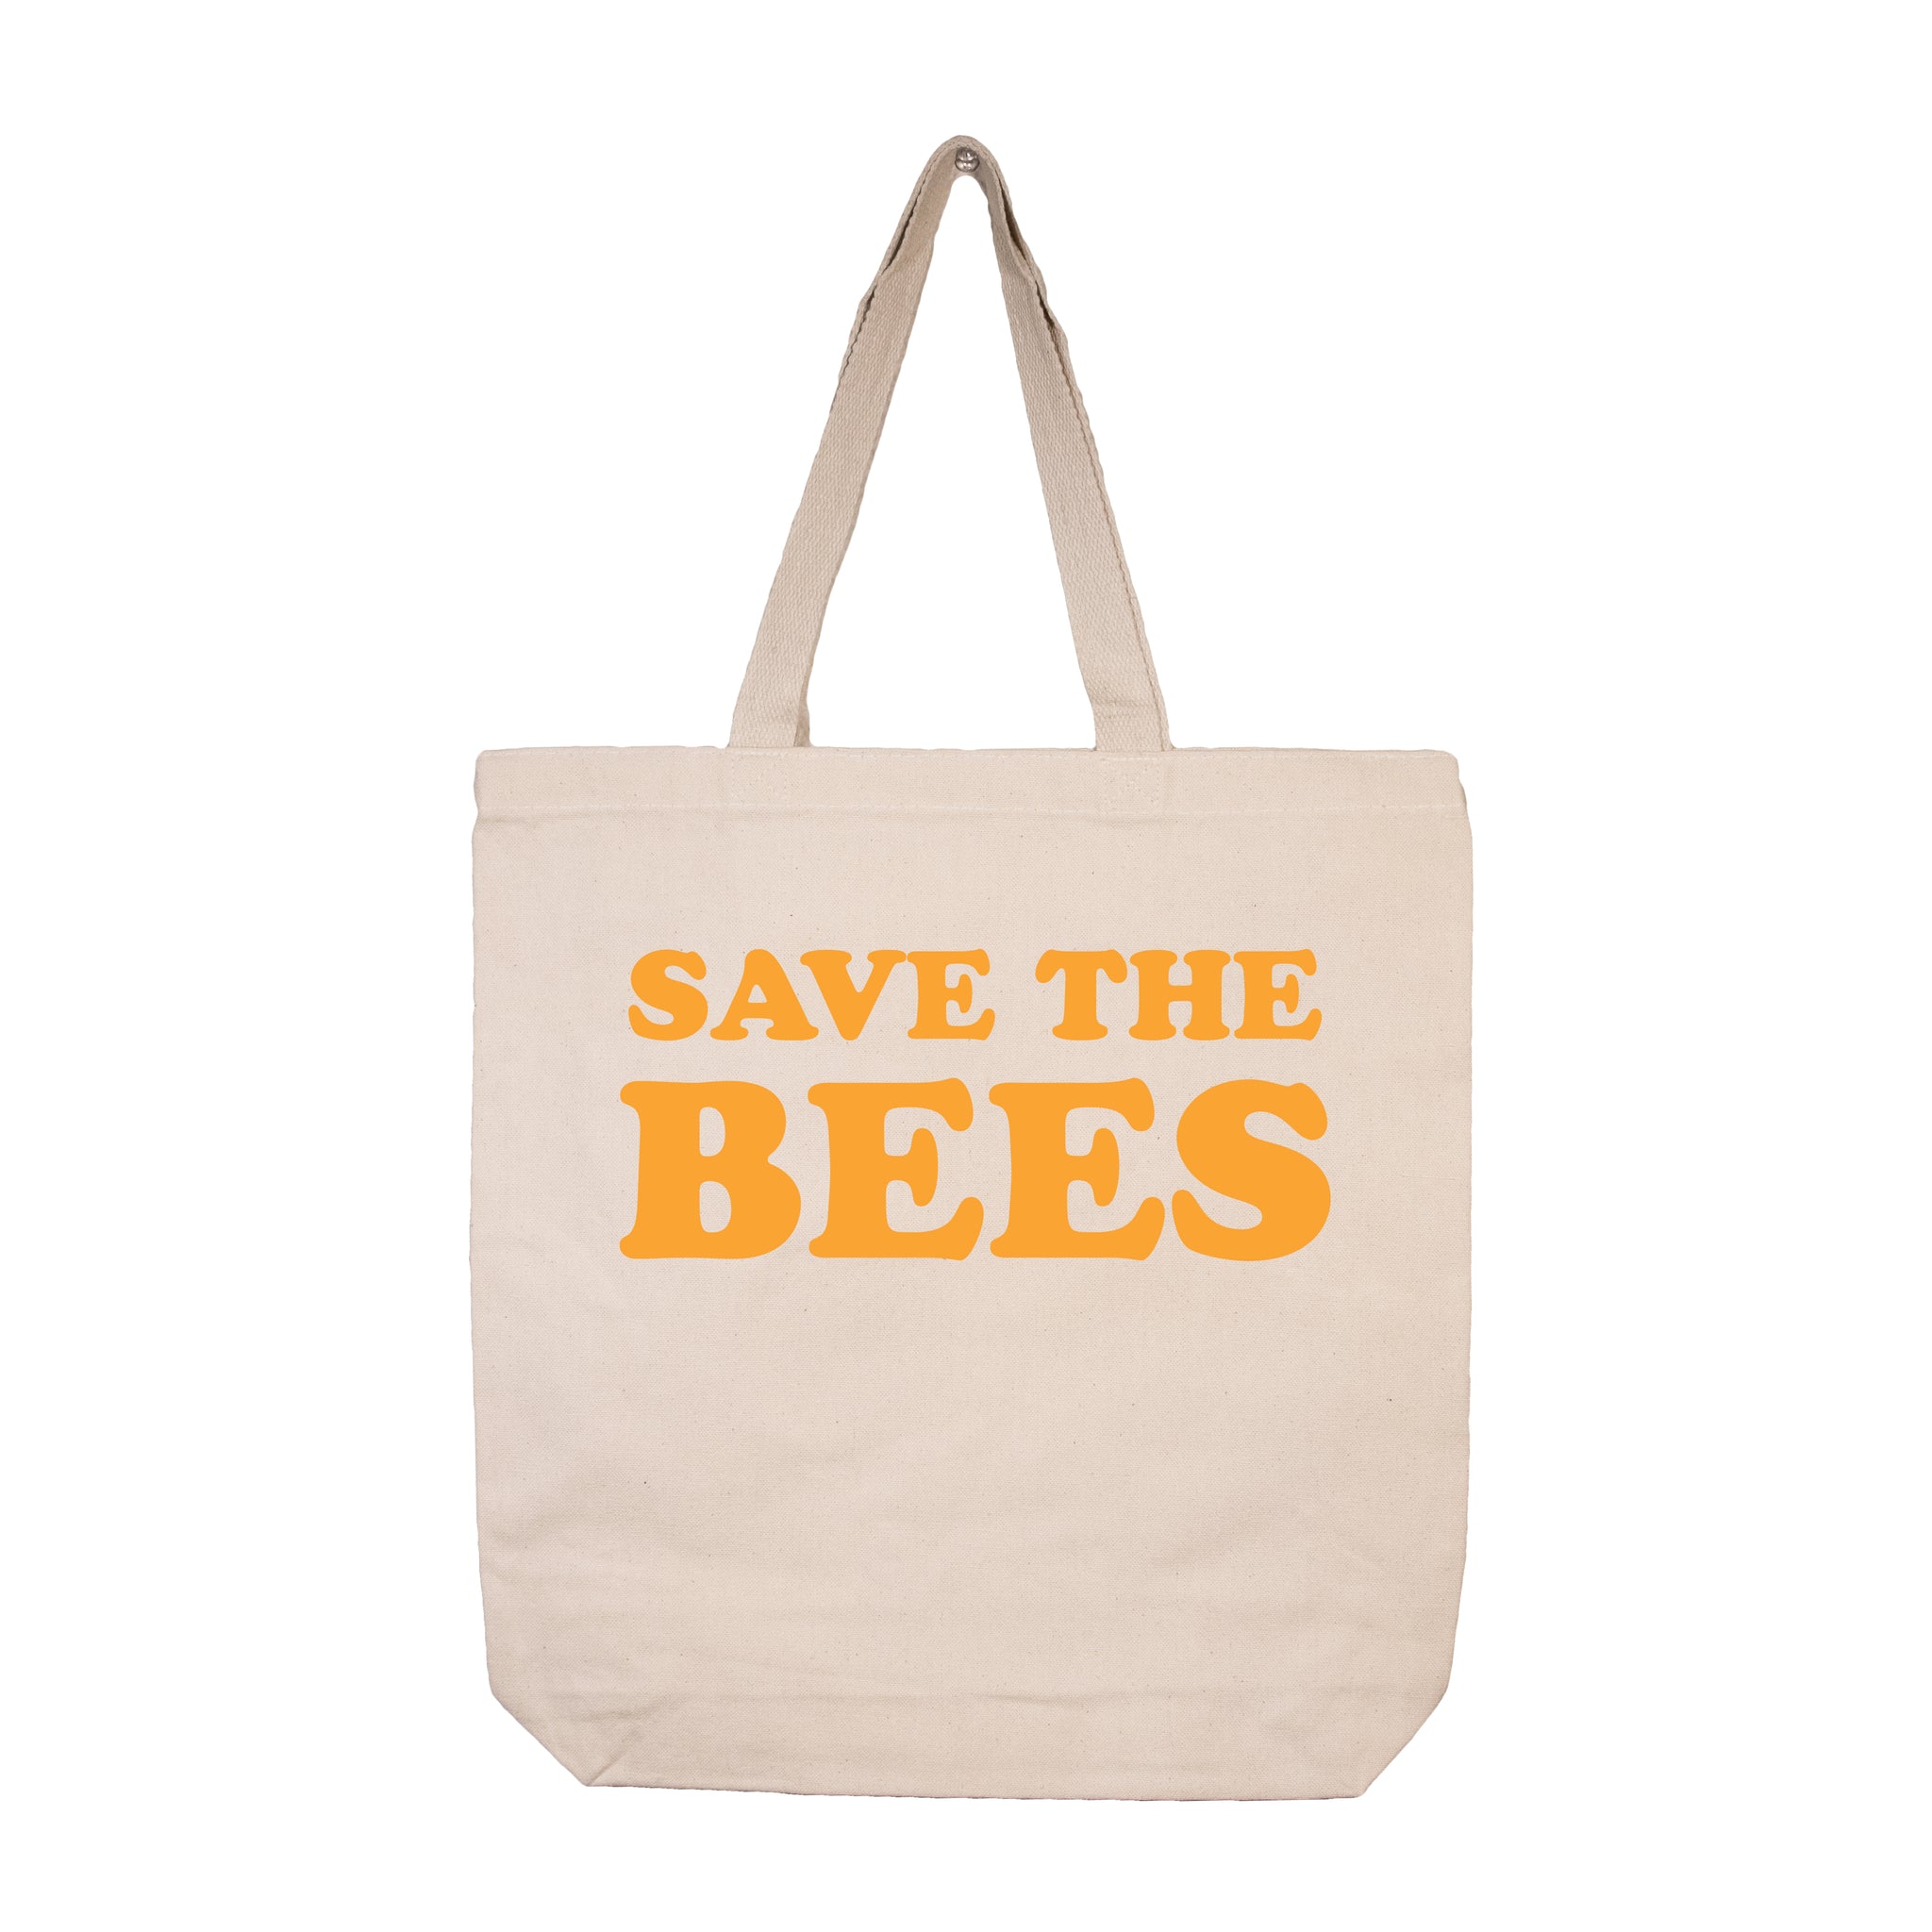 Save The Bees Tan Canvas Tote Bag with Yellow/Gold Lettering #SaveTheBees